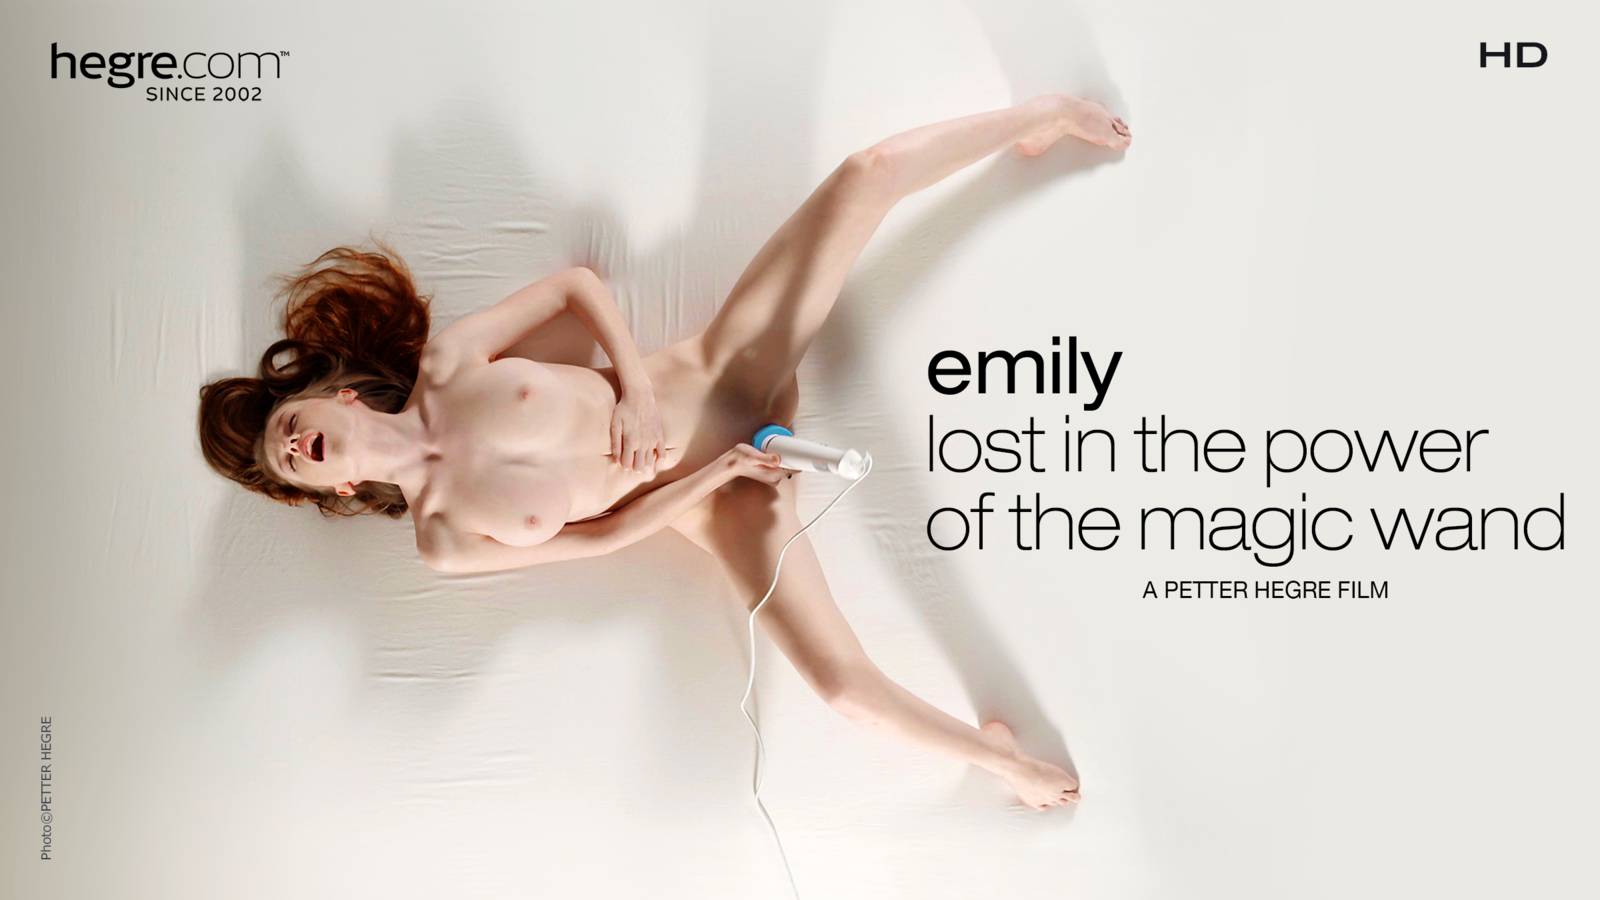 emily-lost-in-the-power-of-the-magic-wand-board-image-1600x.jpg